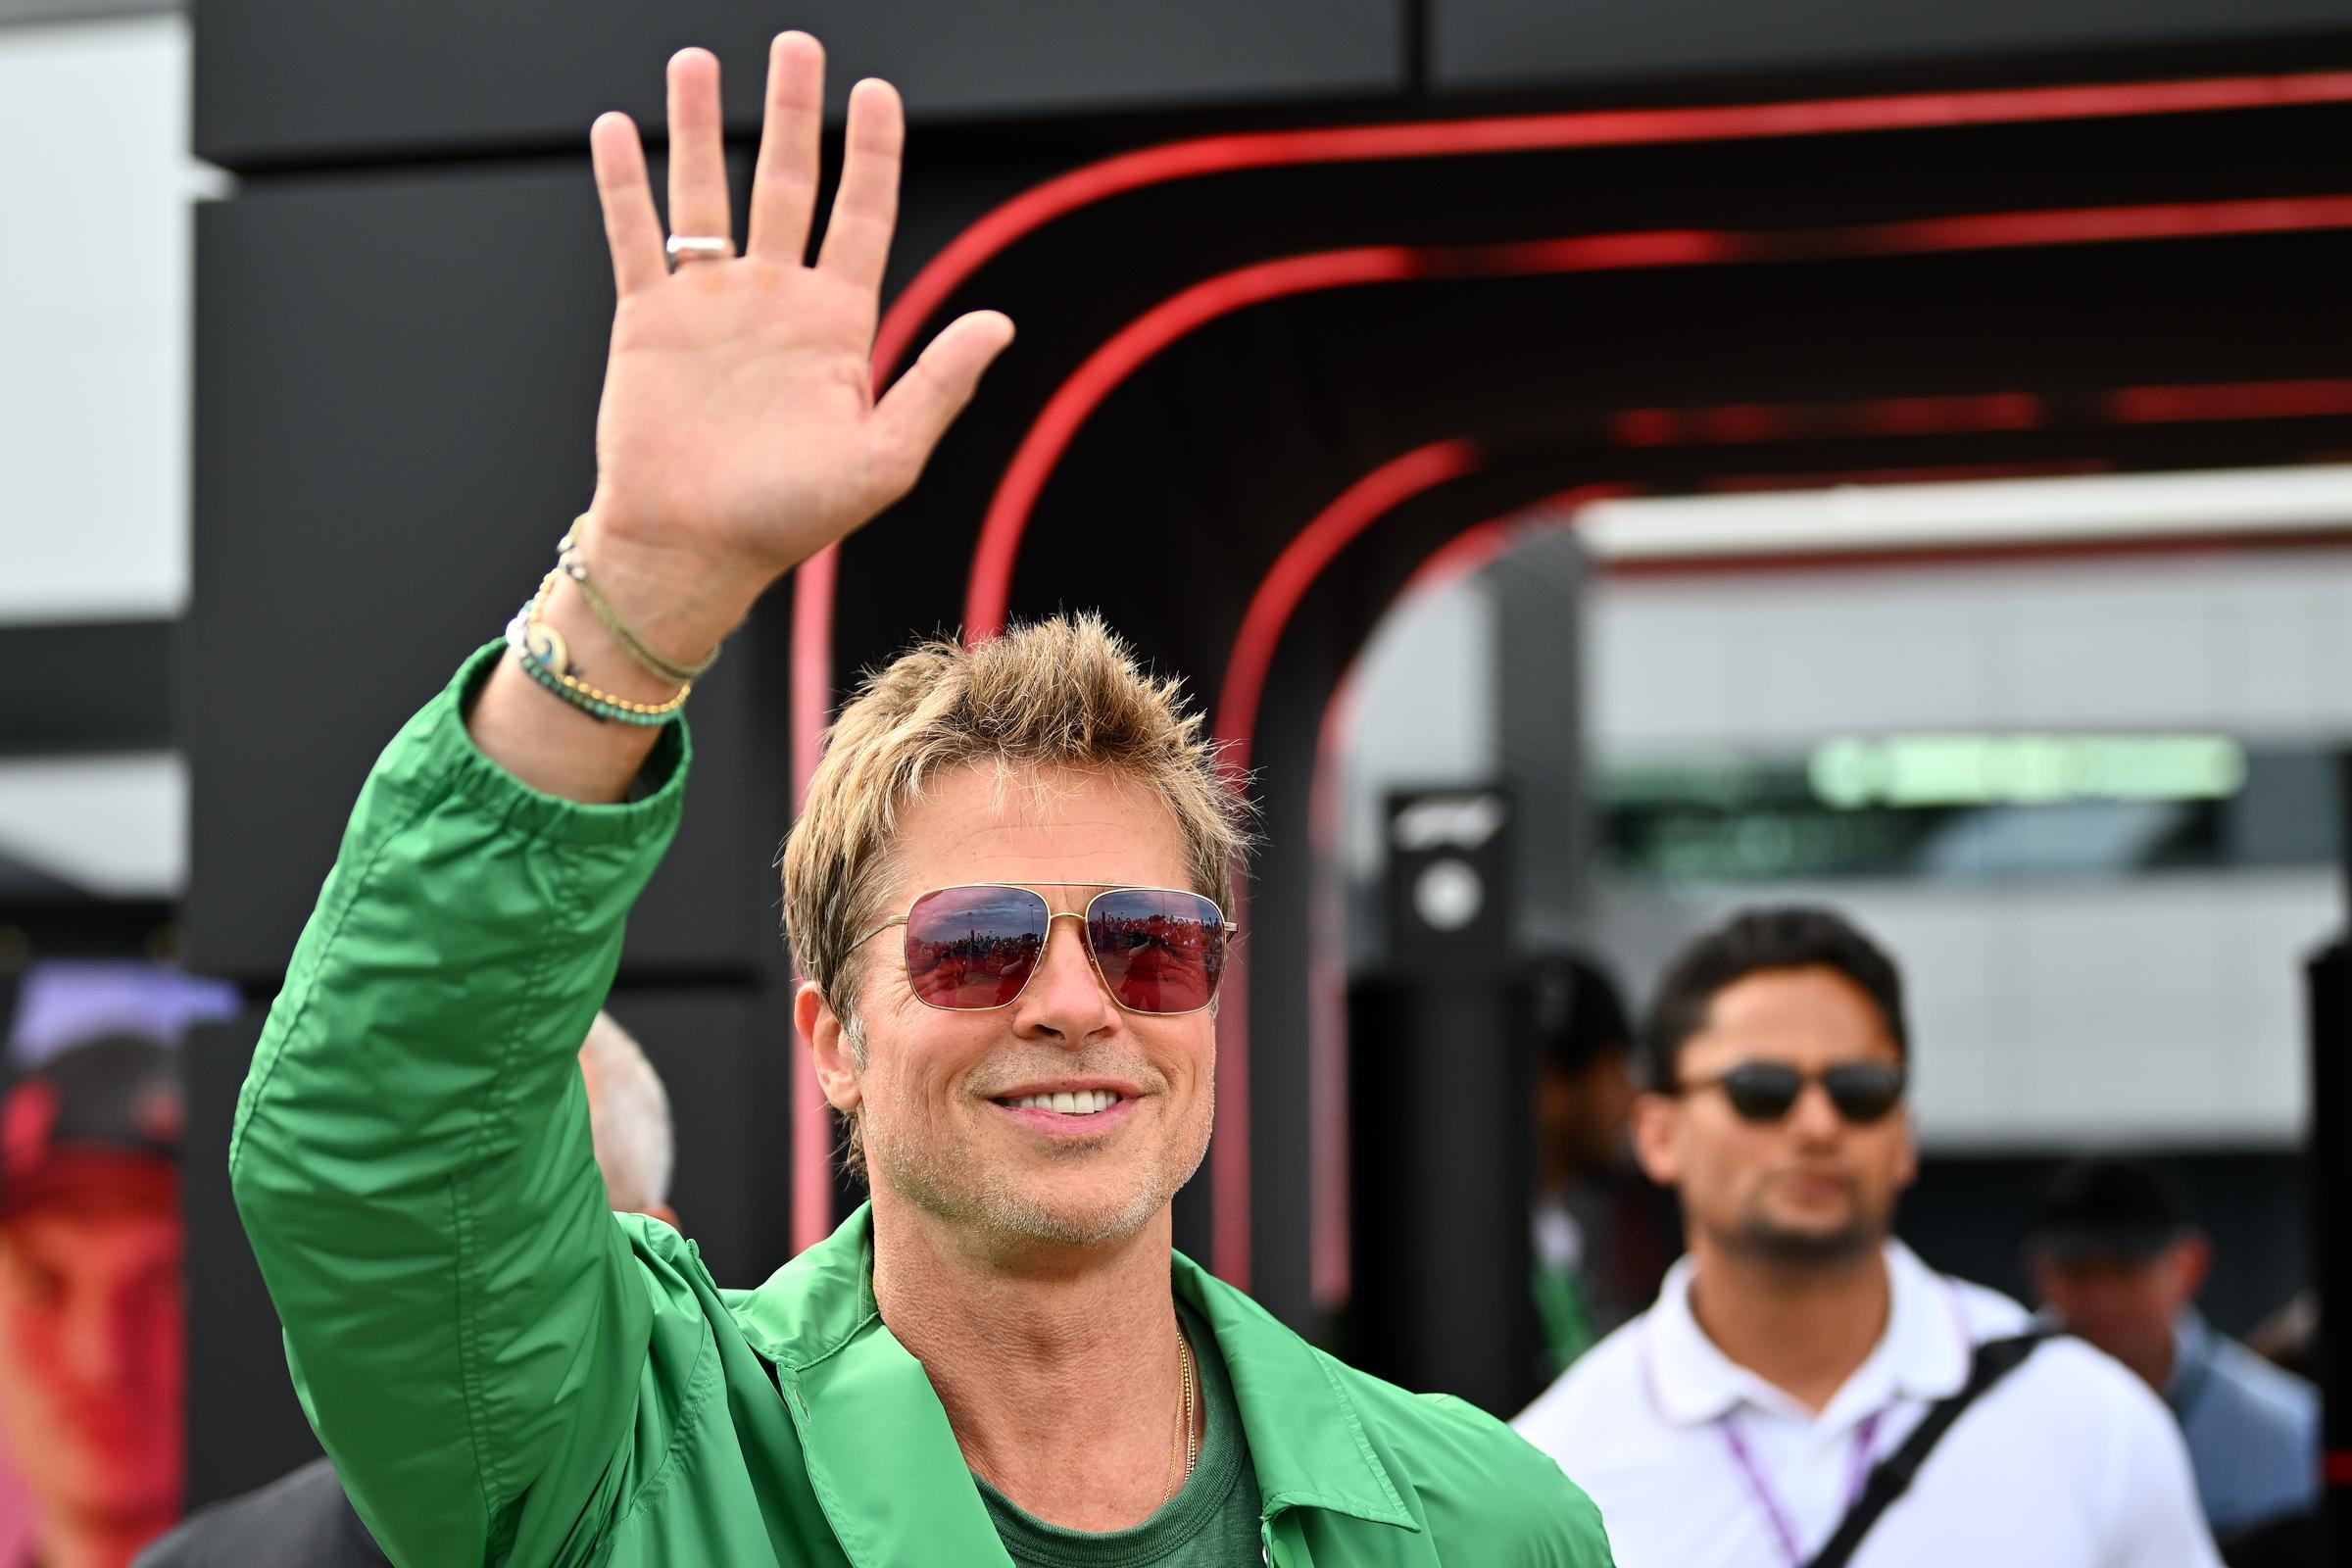 Brad Pitt waves while walking in the Paddock after qualifying for the F1 Grand Prix of Great Britain at Silverstone Circuit in Northampton, England on July 8, 2023. | Source: Getty Images